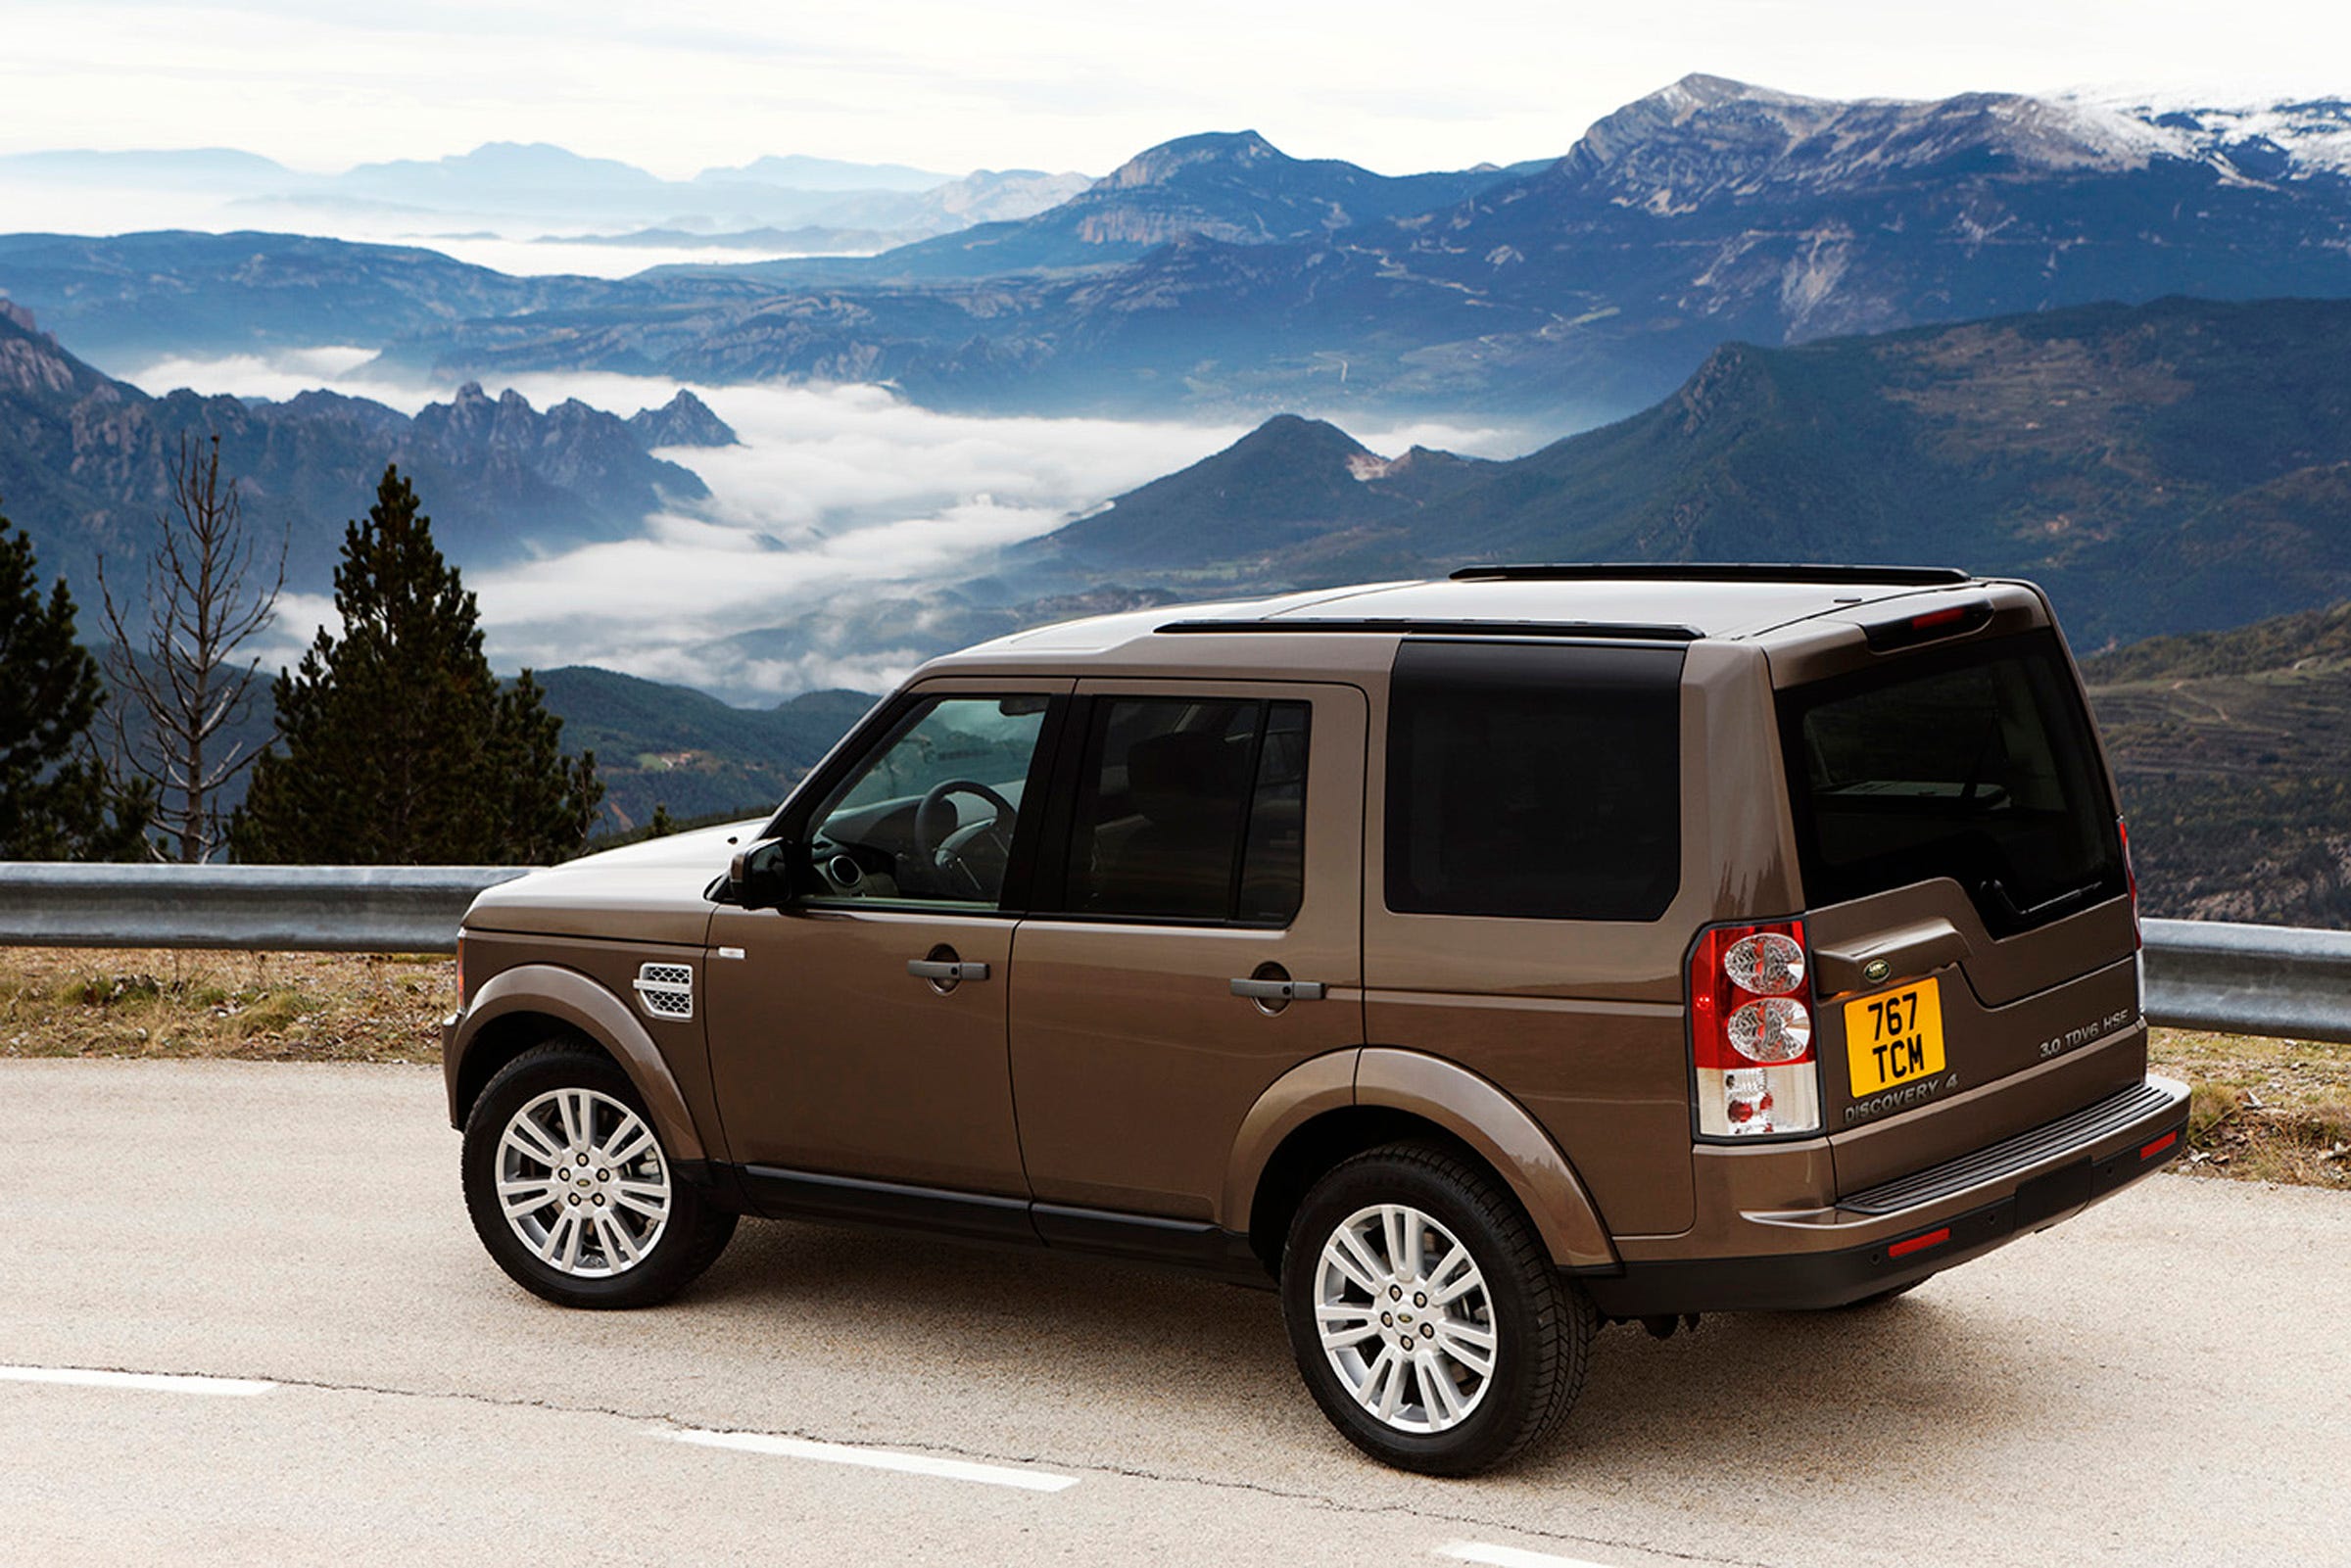 Land Rover LR4 is luxuriously tough